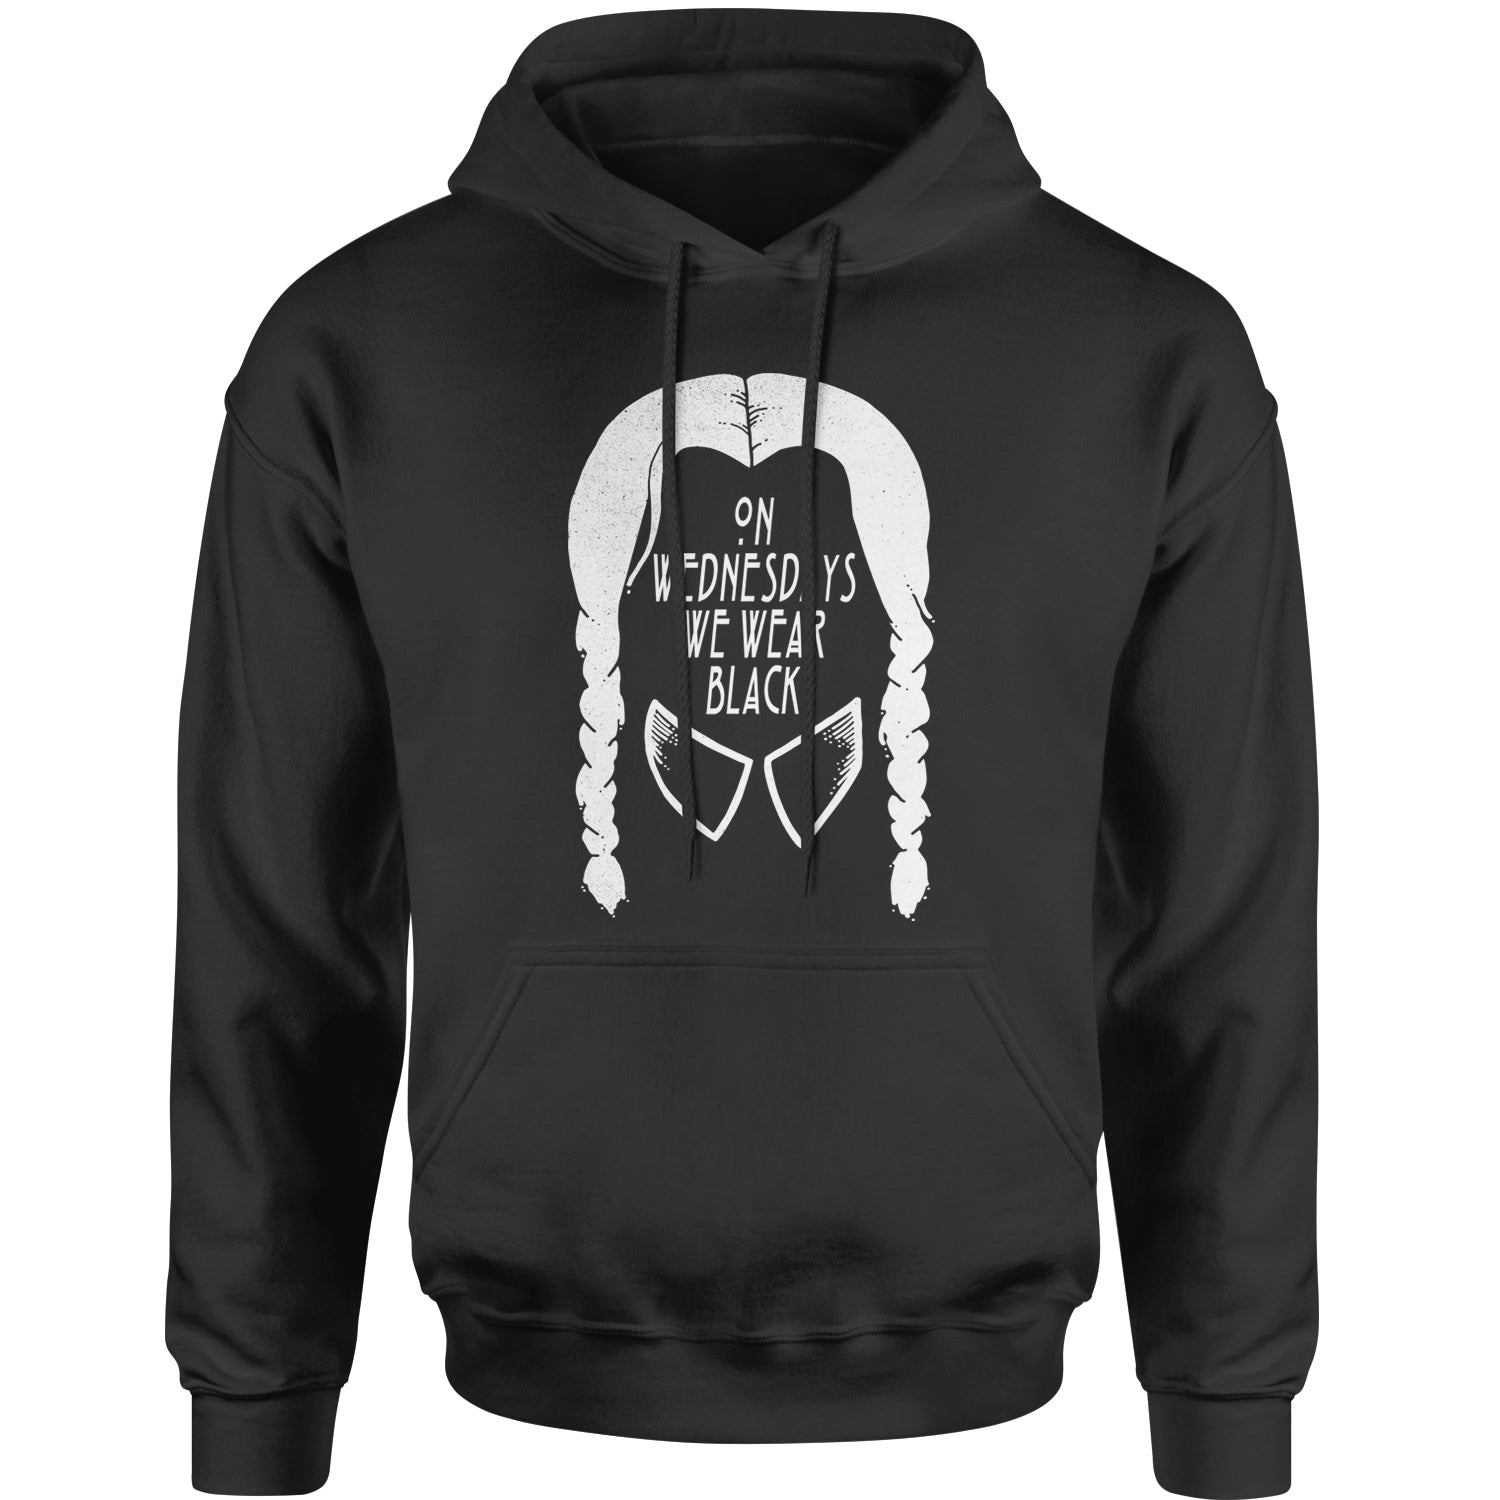 On Wednesdays, We Wear Black Adult Hoodie Sweatshirt addams, family, gomez, morticia, pugsly, ricci, Wednesday by Expression Tees